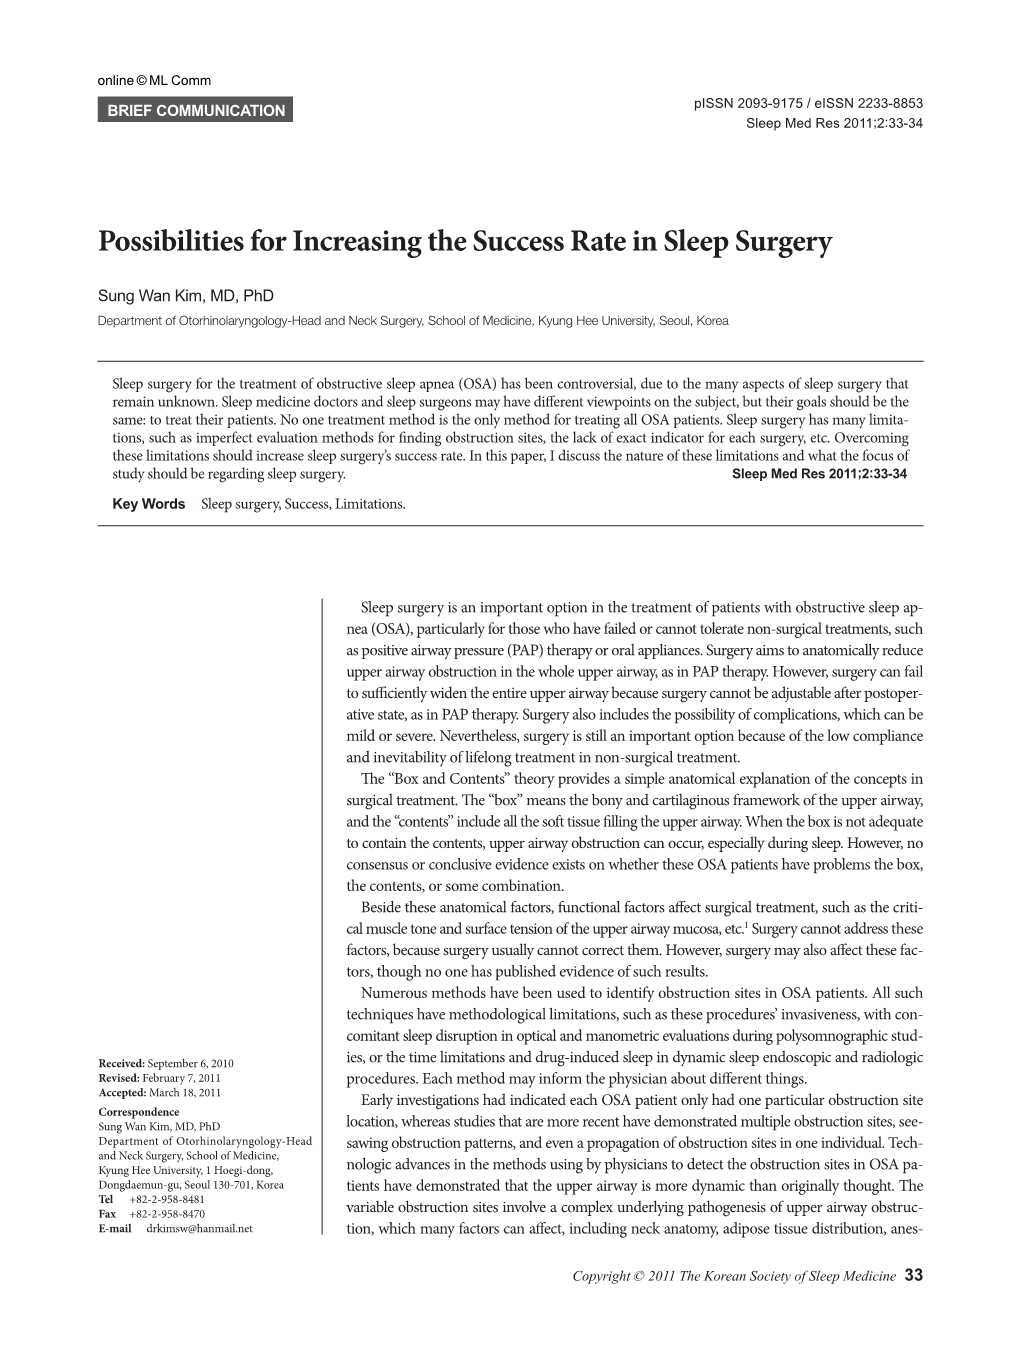 Possibilities for Increasing the Success Rate in Sleep Surgery